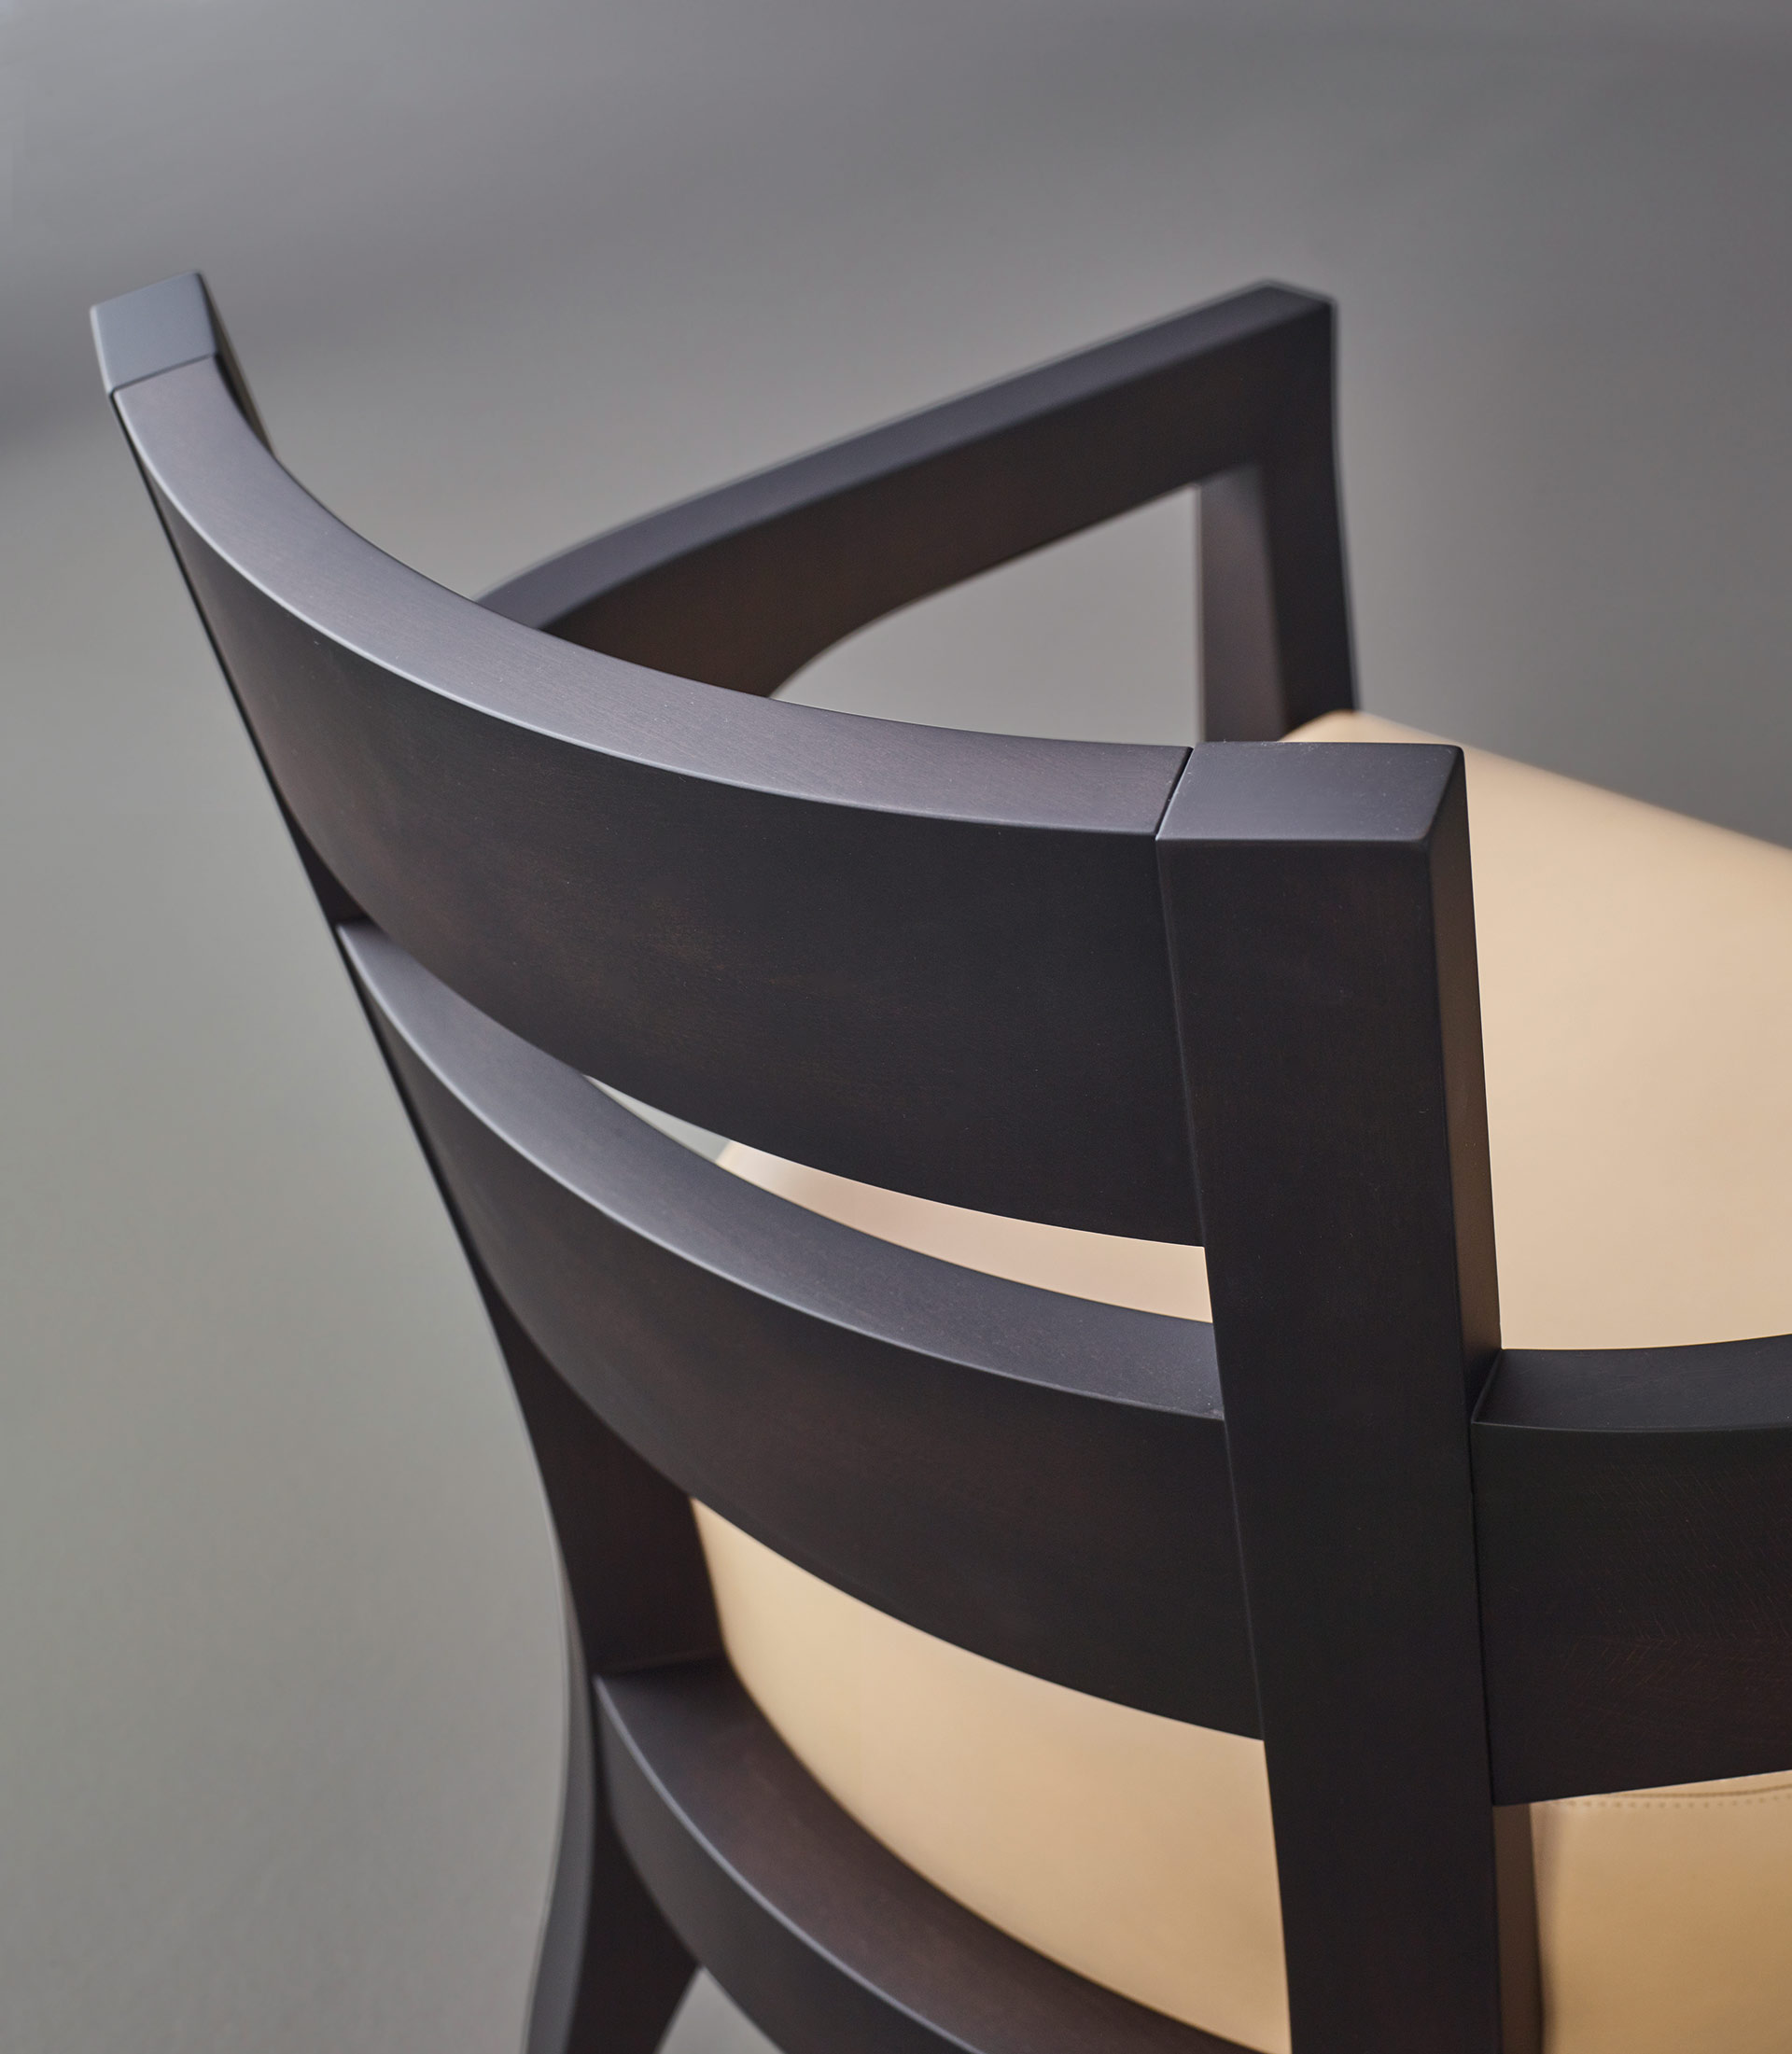 Backrest detail of Africa, a wooden armchair covered in fabric or leather, from Promemoria's catalogue | Promemoria